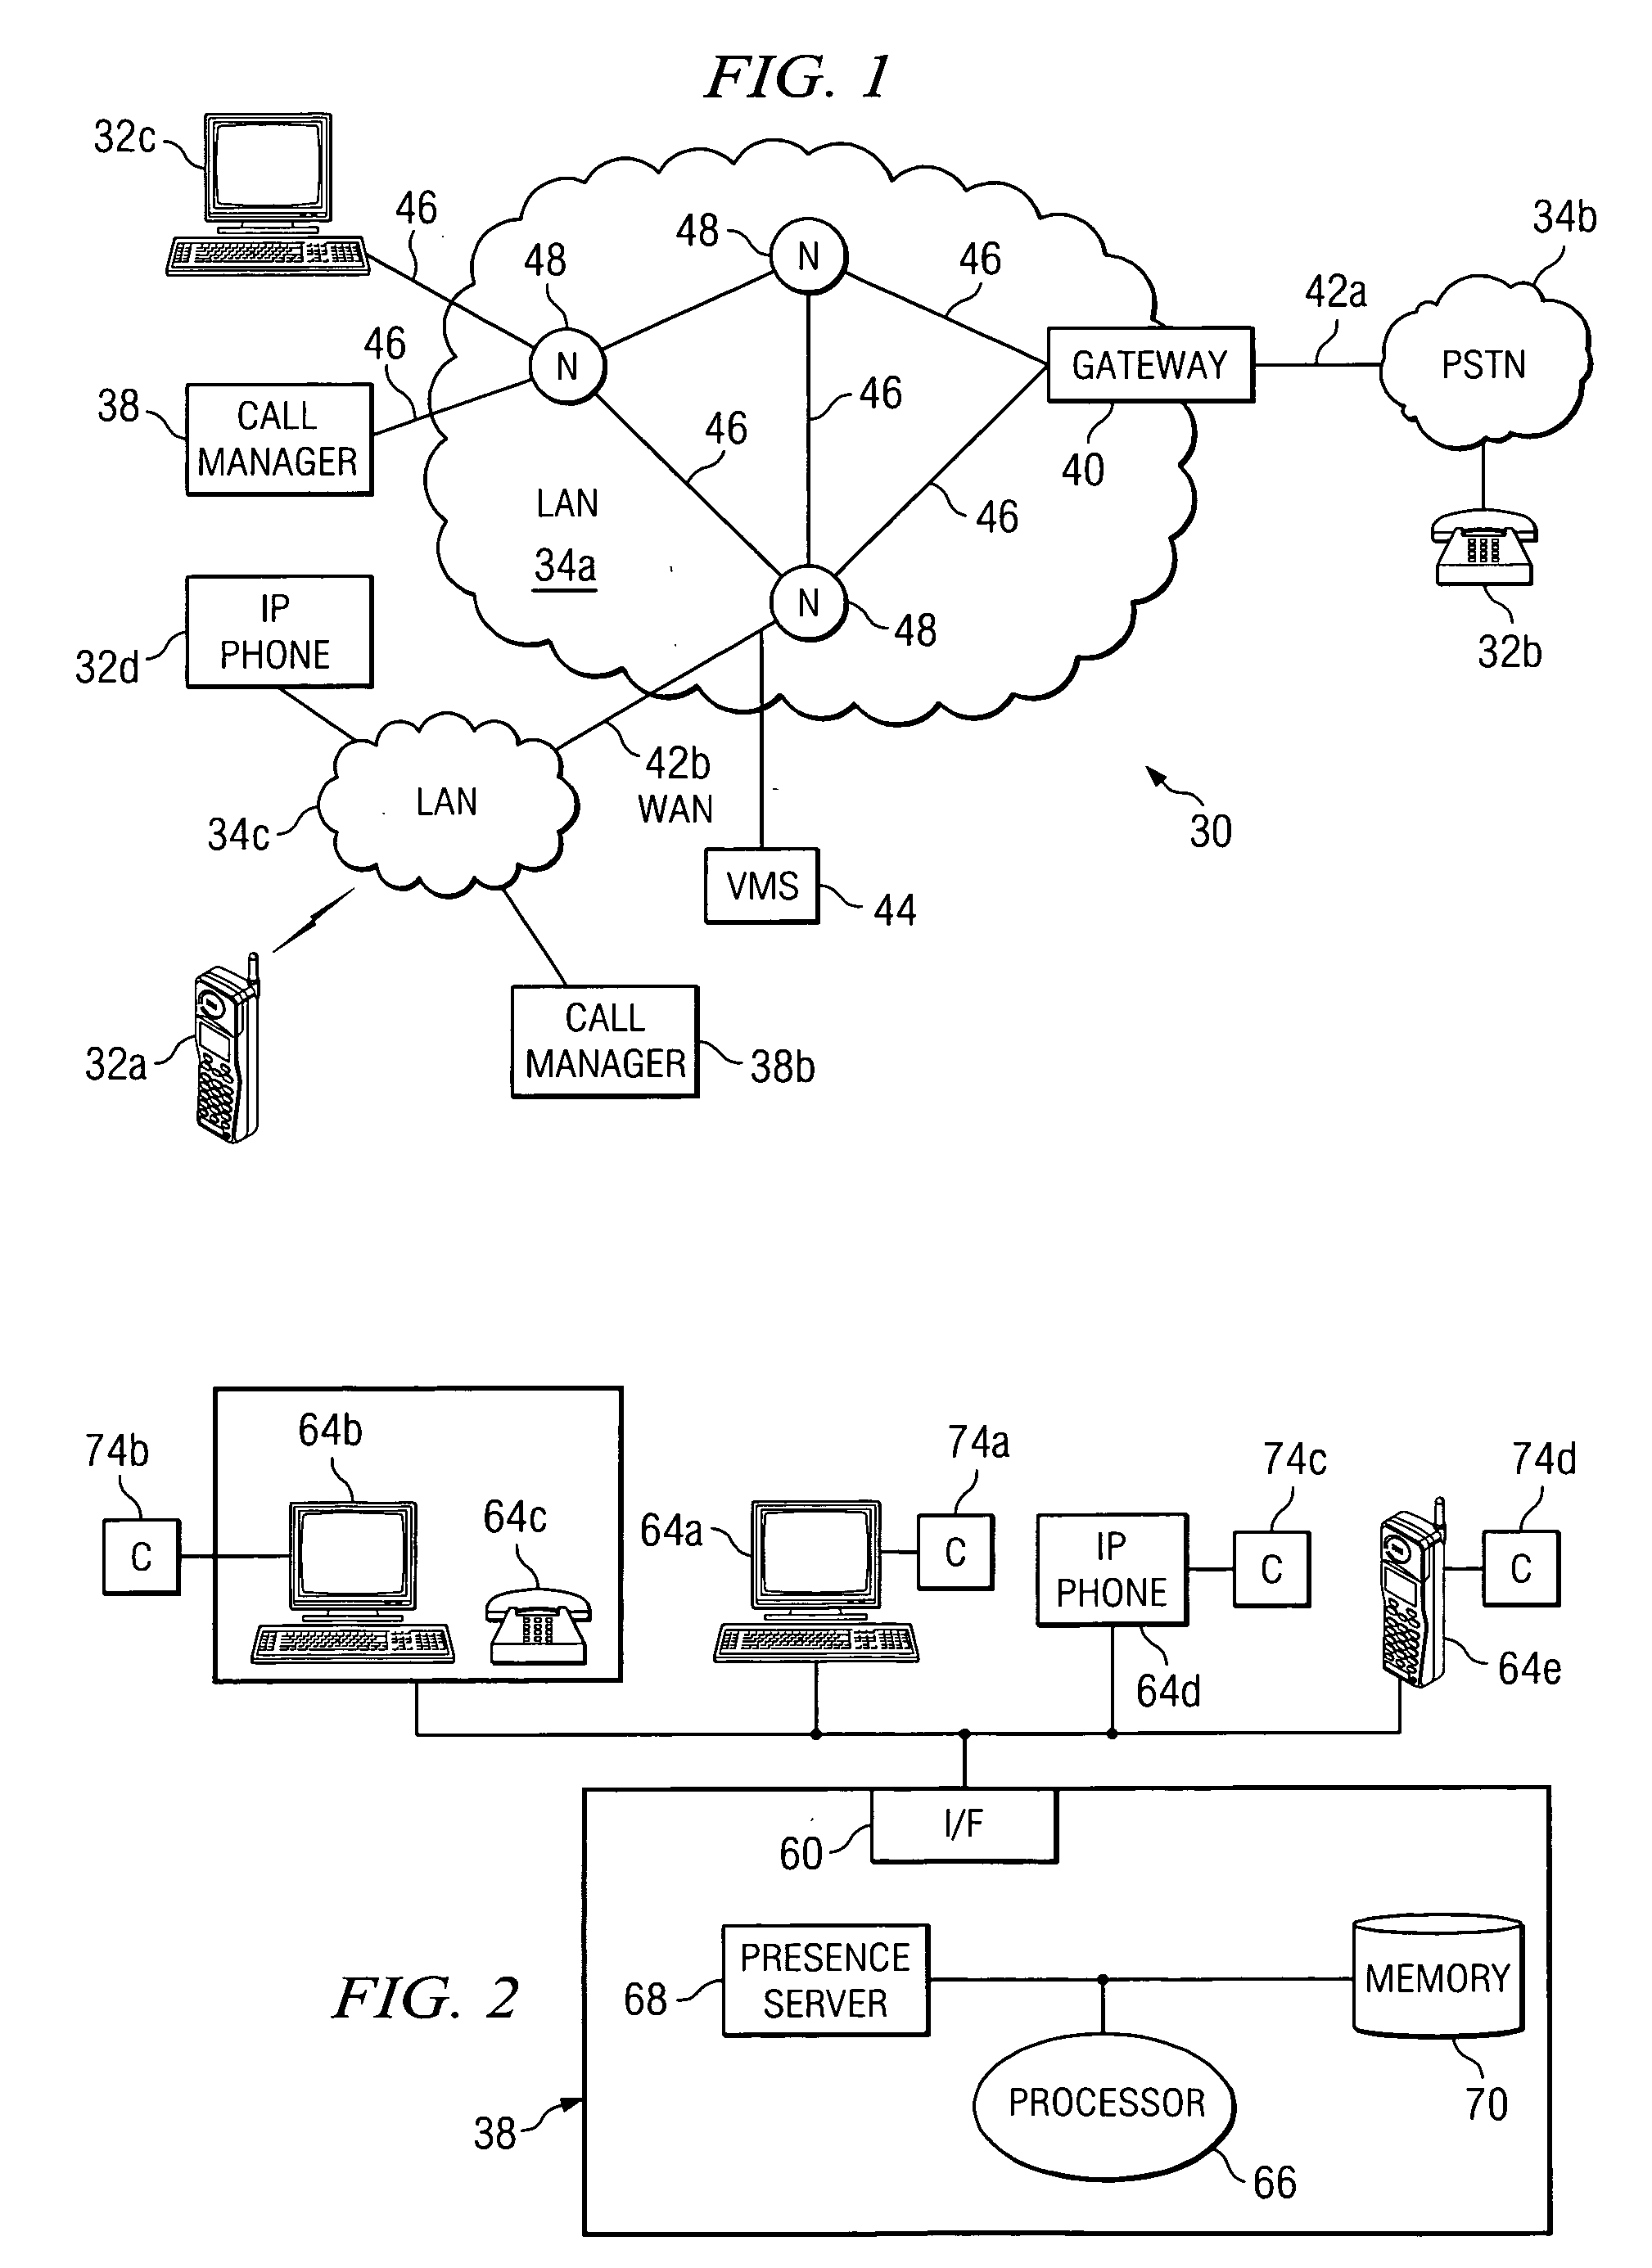 System and method for message prioritization